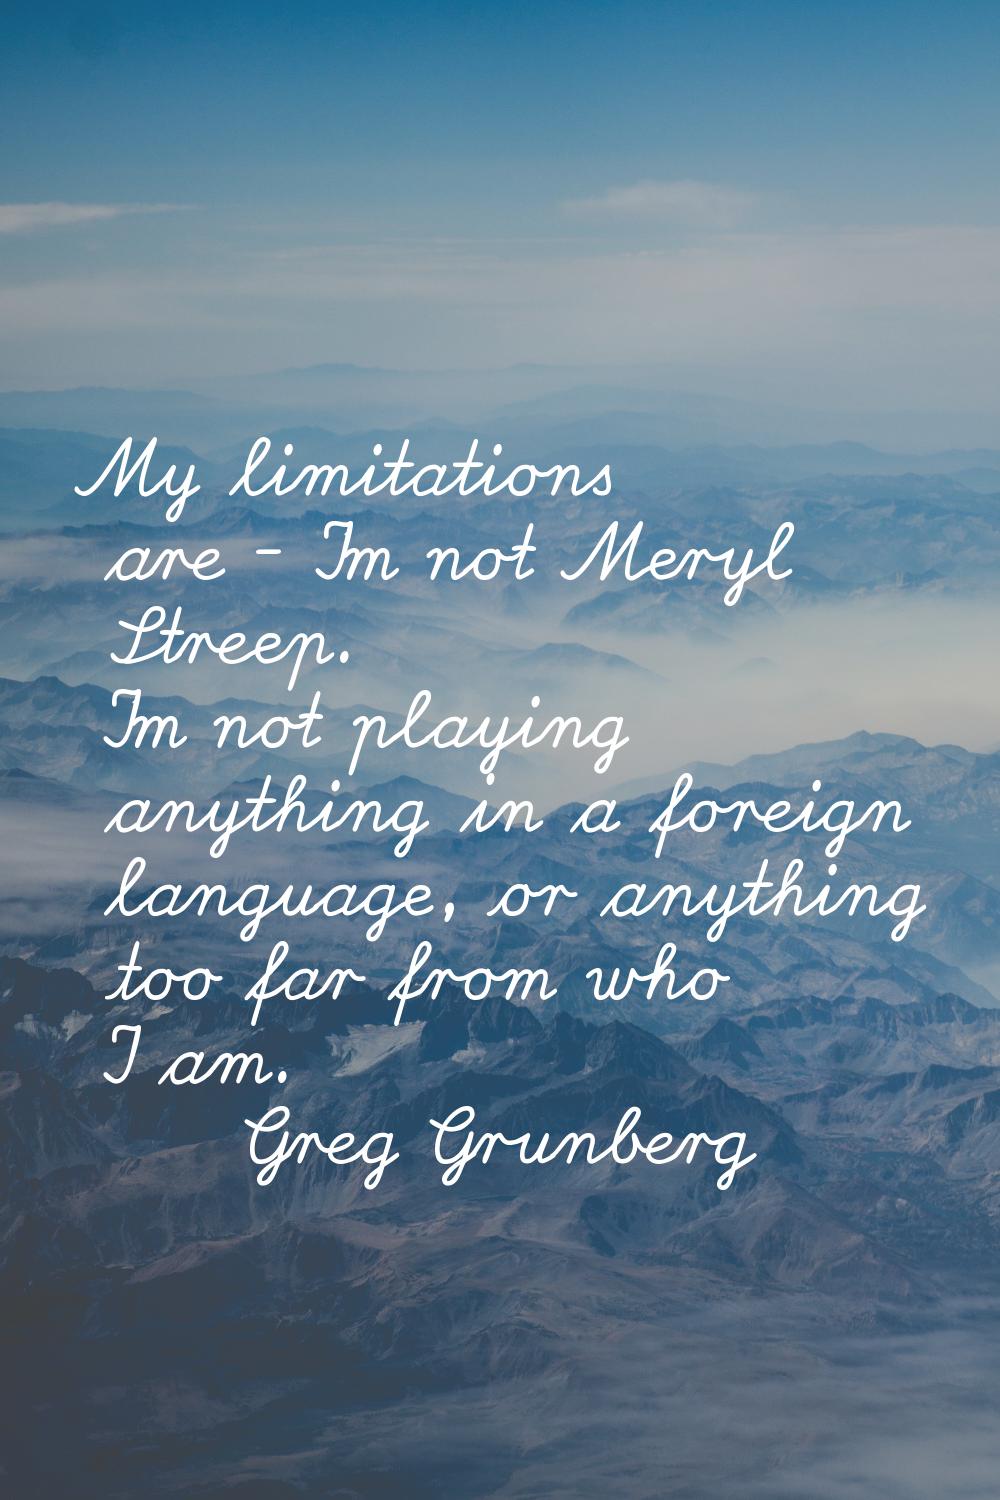 My limitations are - I'm not Meryl Streep. I'm not playing anything in a foreign language, or anyth